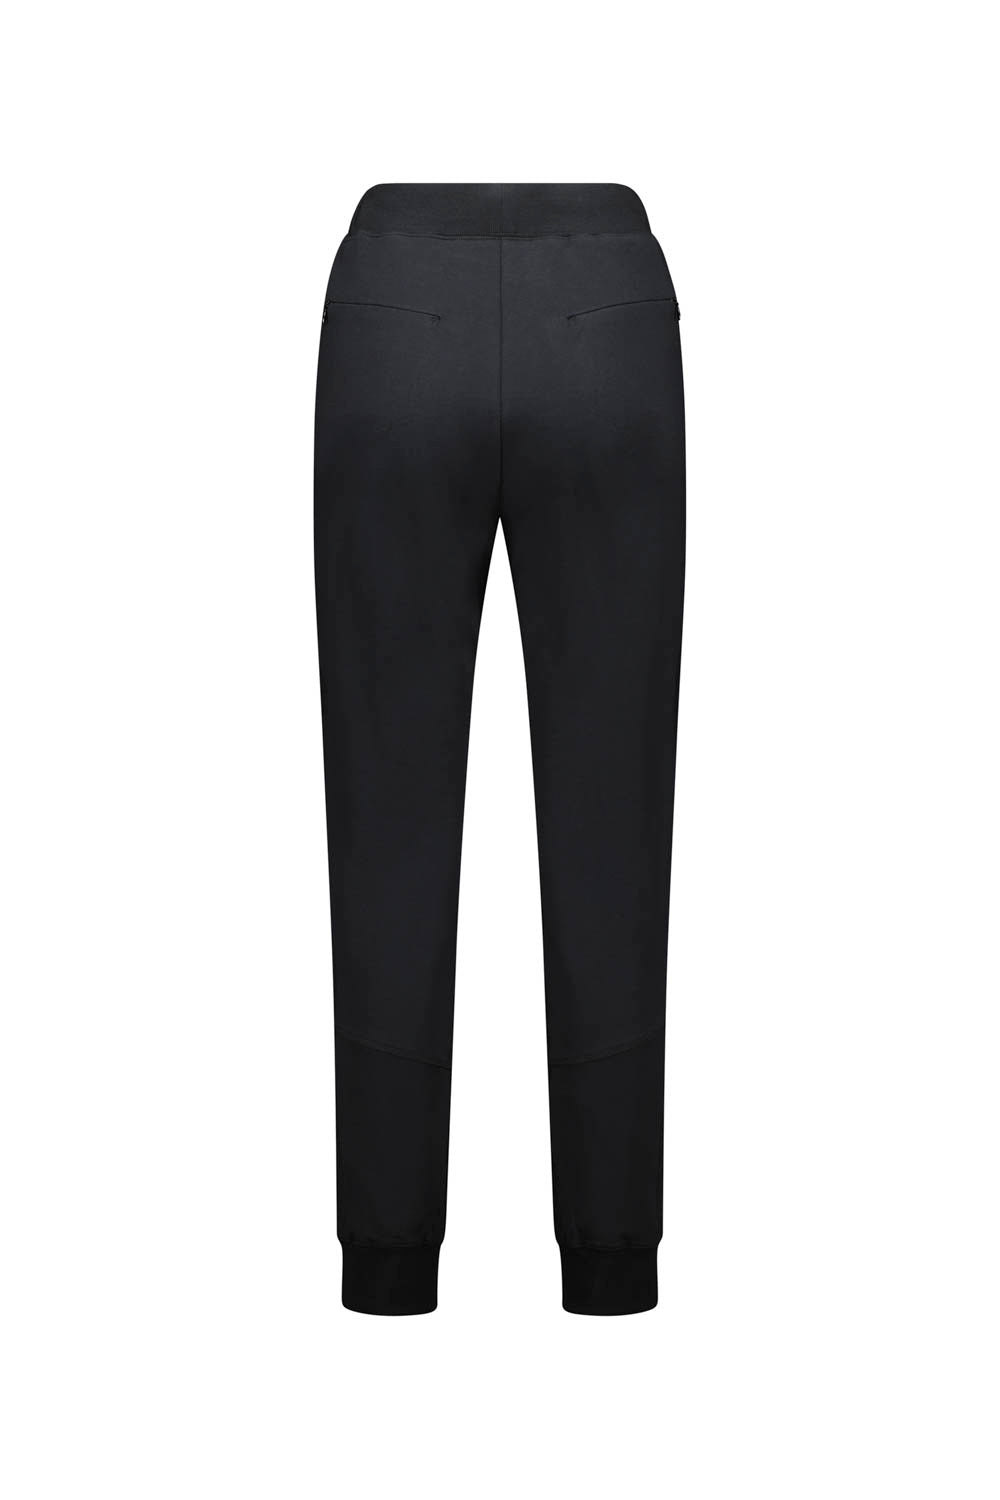 Verge Cultured Pant - Sizes: 10 12 14 16